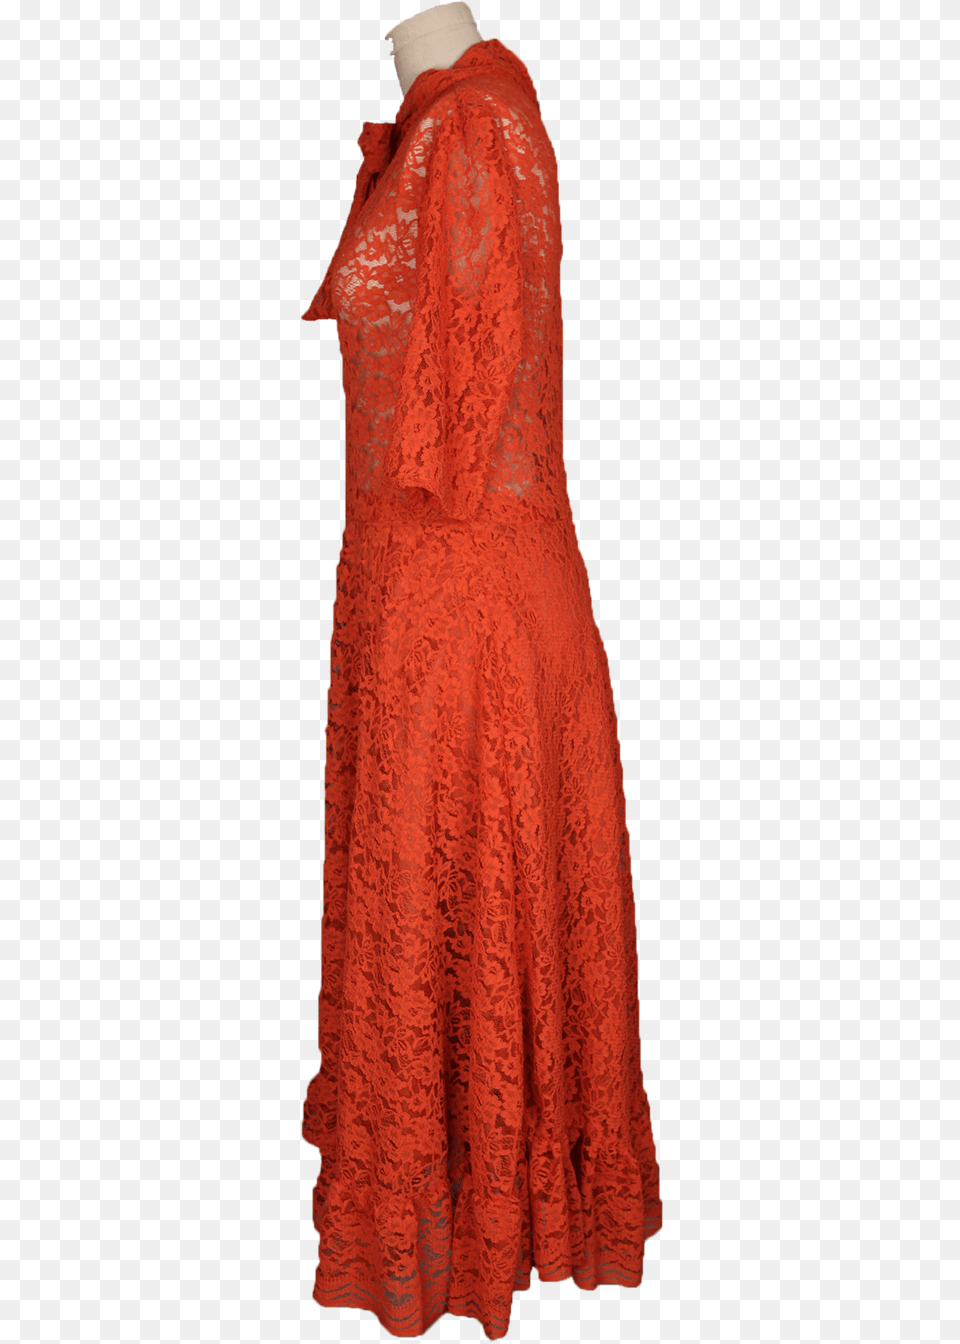 Orange Lace Dress Side Gown, Clothing, Fashion, Formal Wear, Adult Free Transparent Png